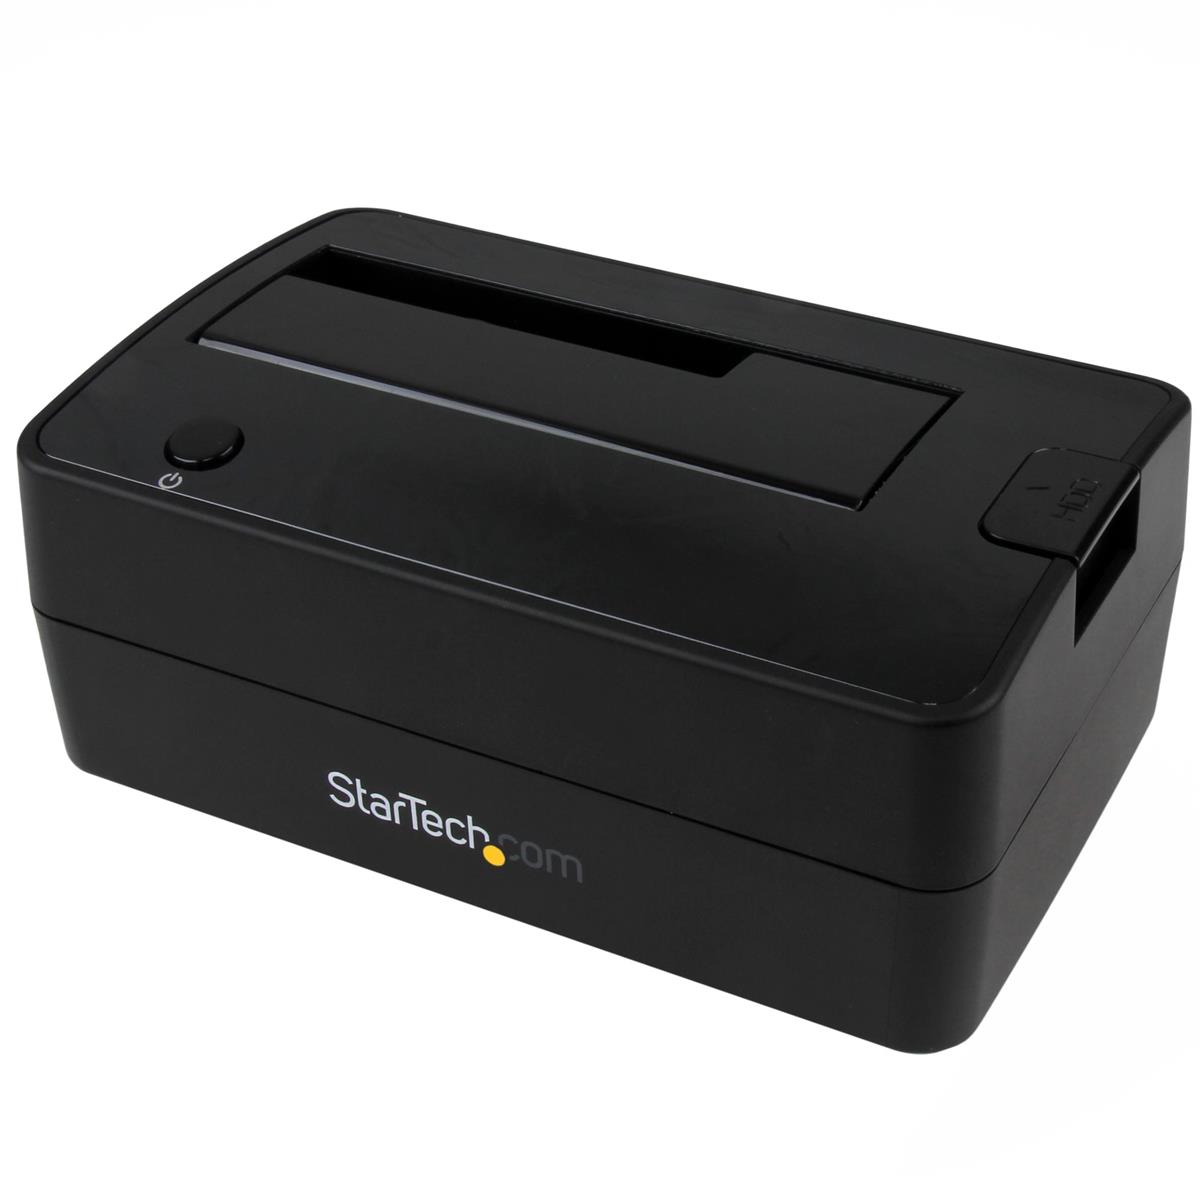 Image of StarTech USB 3.1 10Gbps Single-Bay Dock for 2.5/3.5&quot; SATA SSD and HDD Drives